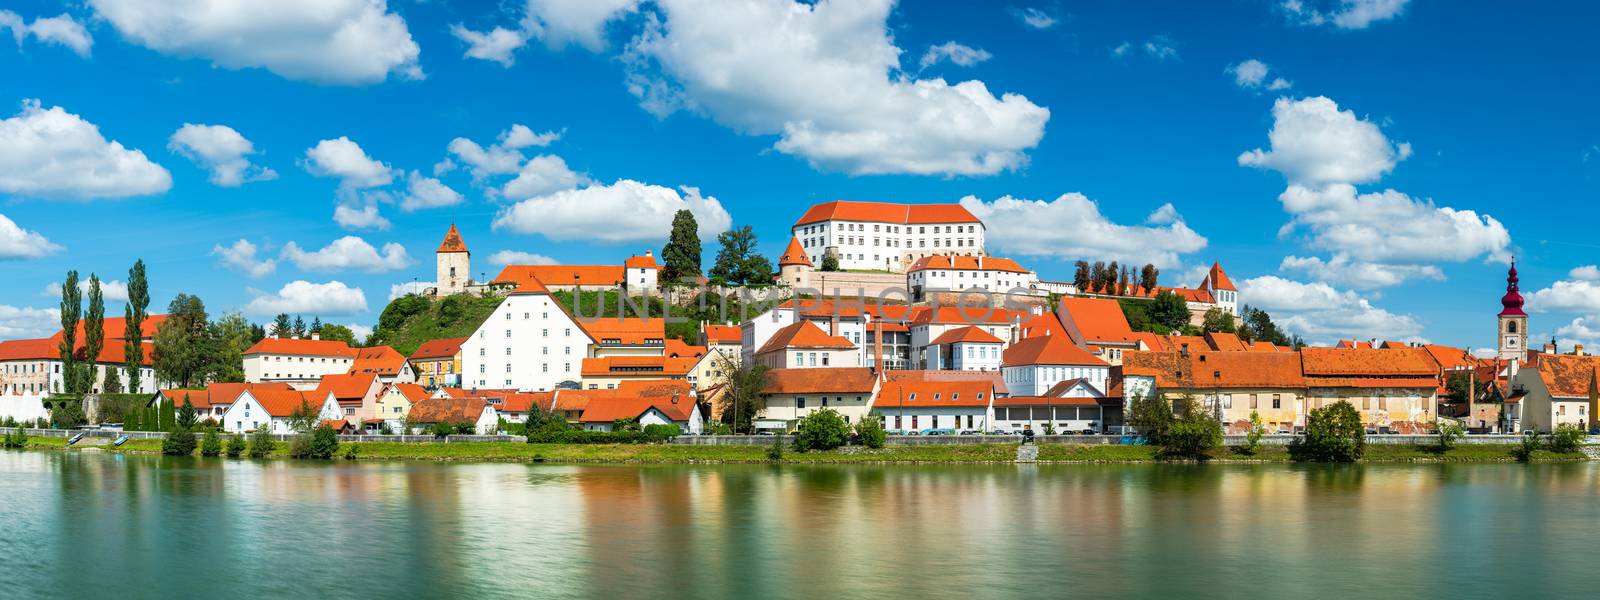 Ptuj Grad in Slovenia with Castle and Cathedral at River Drava.  by merc67